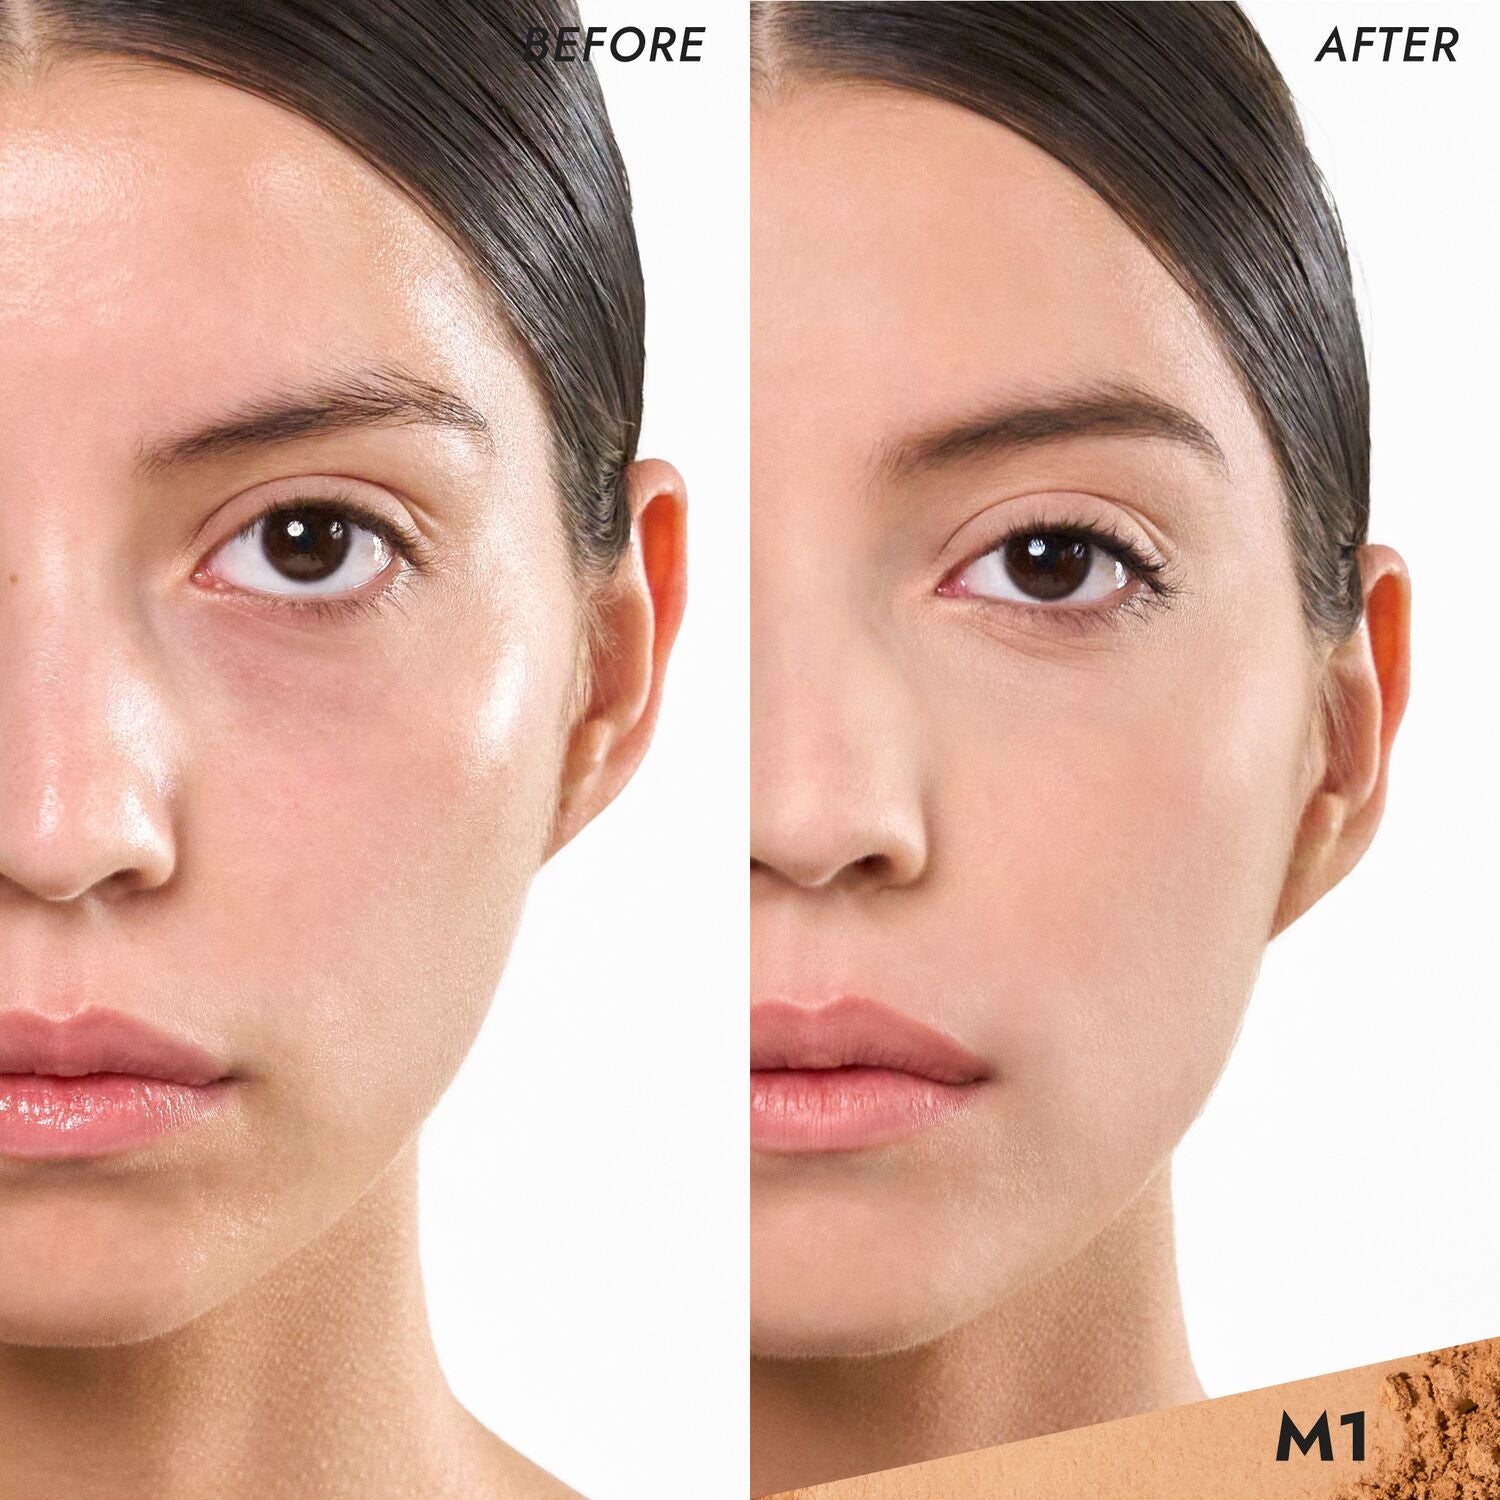 Coverfx Pressed Mineral Foundation model before and after image in shade  M1